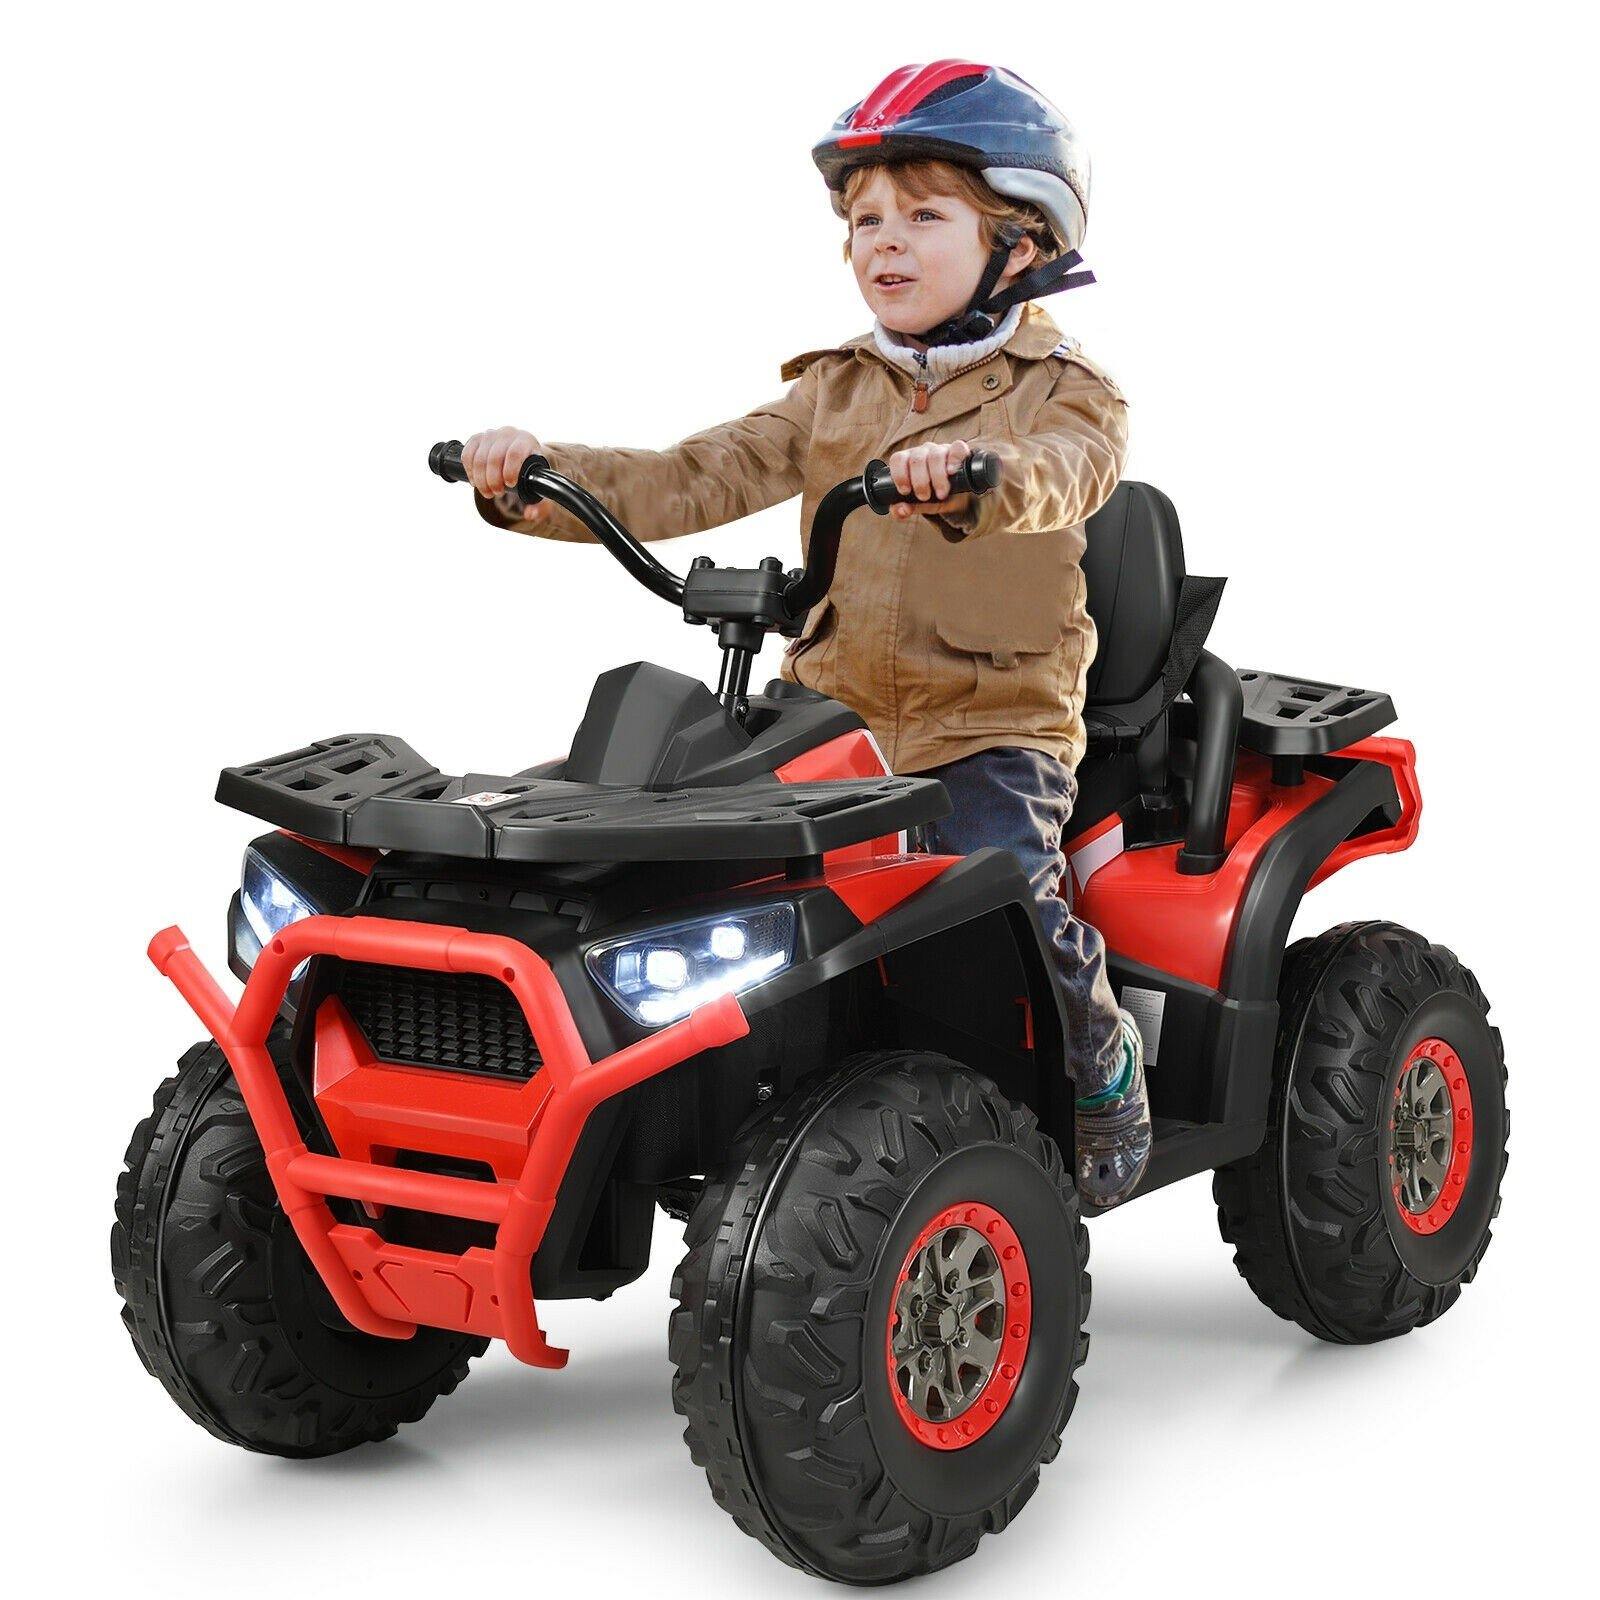 Costzon Ride on ATV, 12V Battery Powered Electric Vehicle w